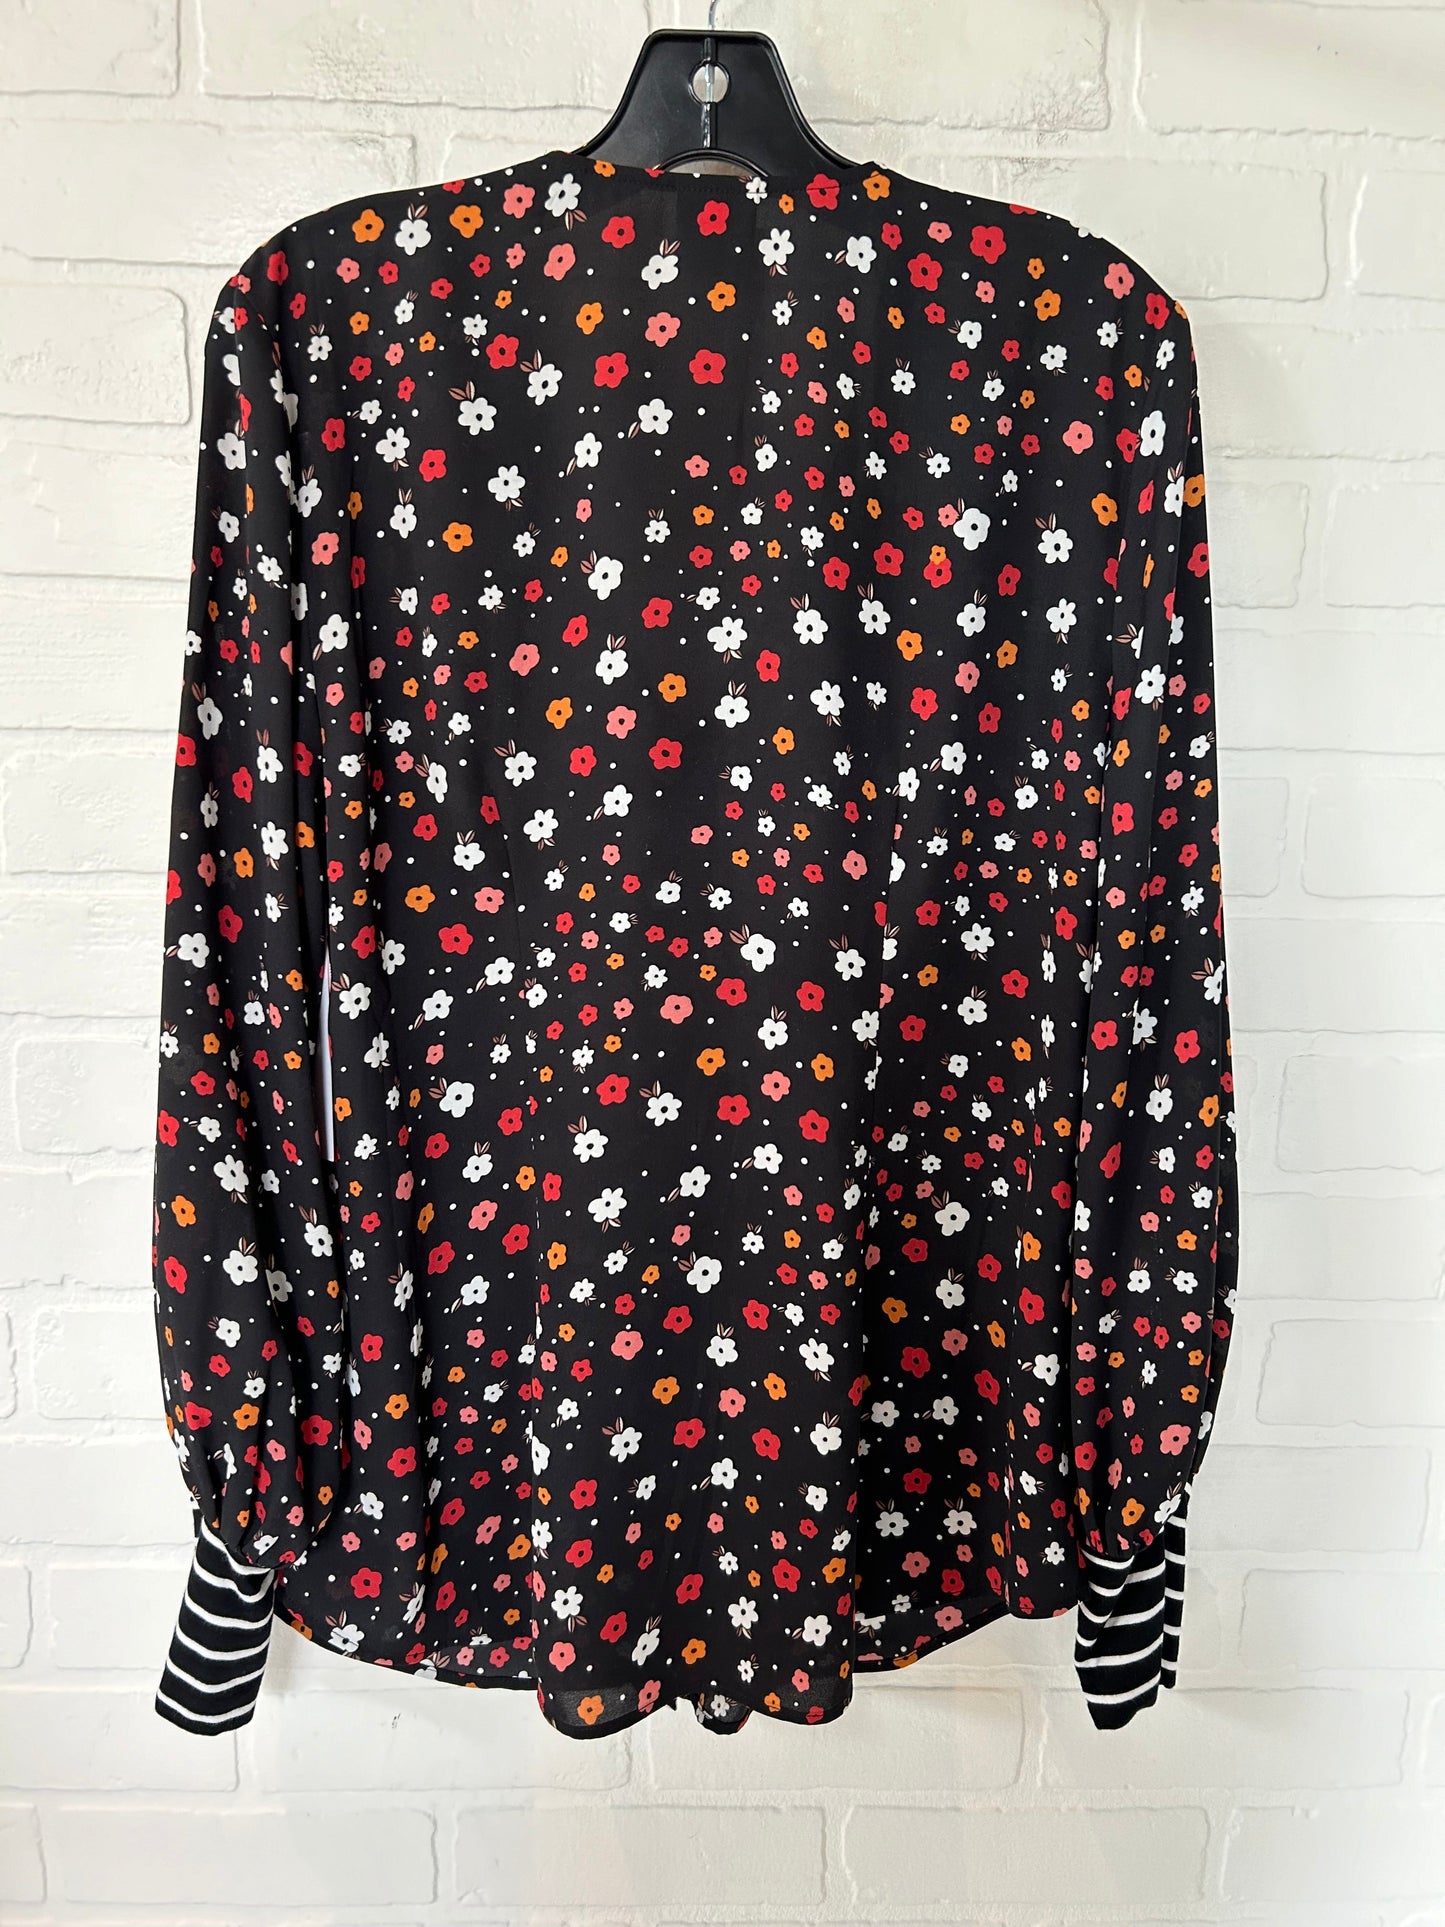 Black & Red Top Long Sleeve Cabi, Size M